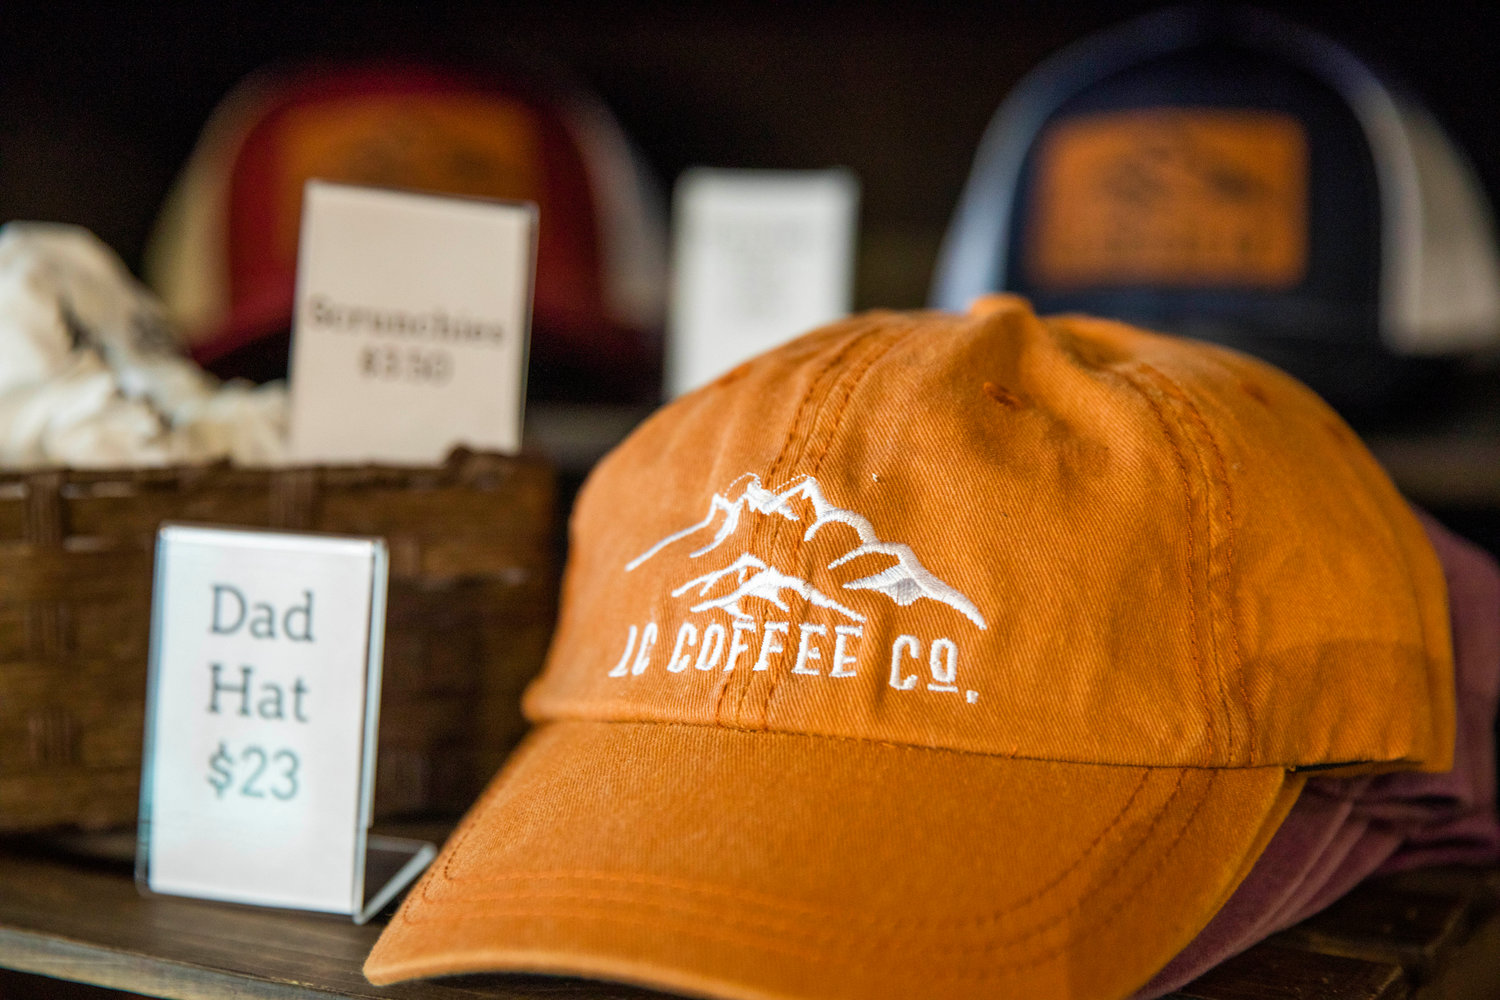 Lewis County Coffee Co. merch sits on display inside The Station in Centralia Wednesday morning.